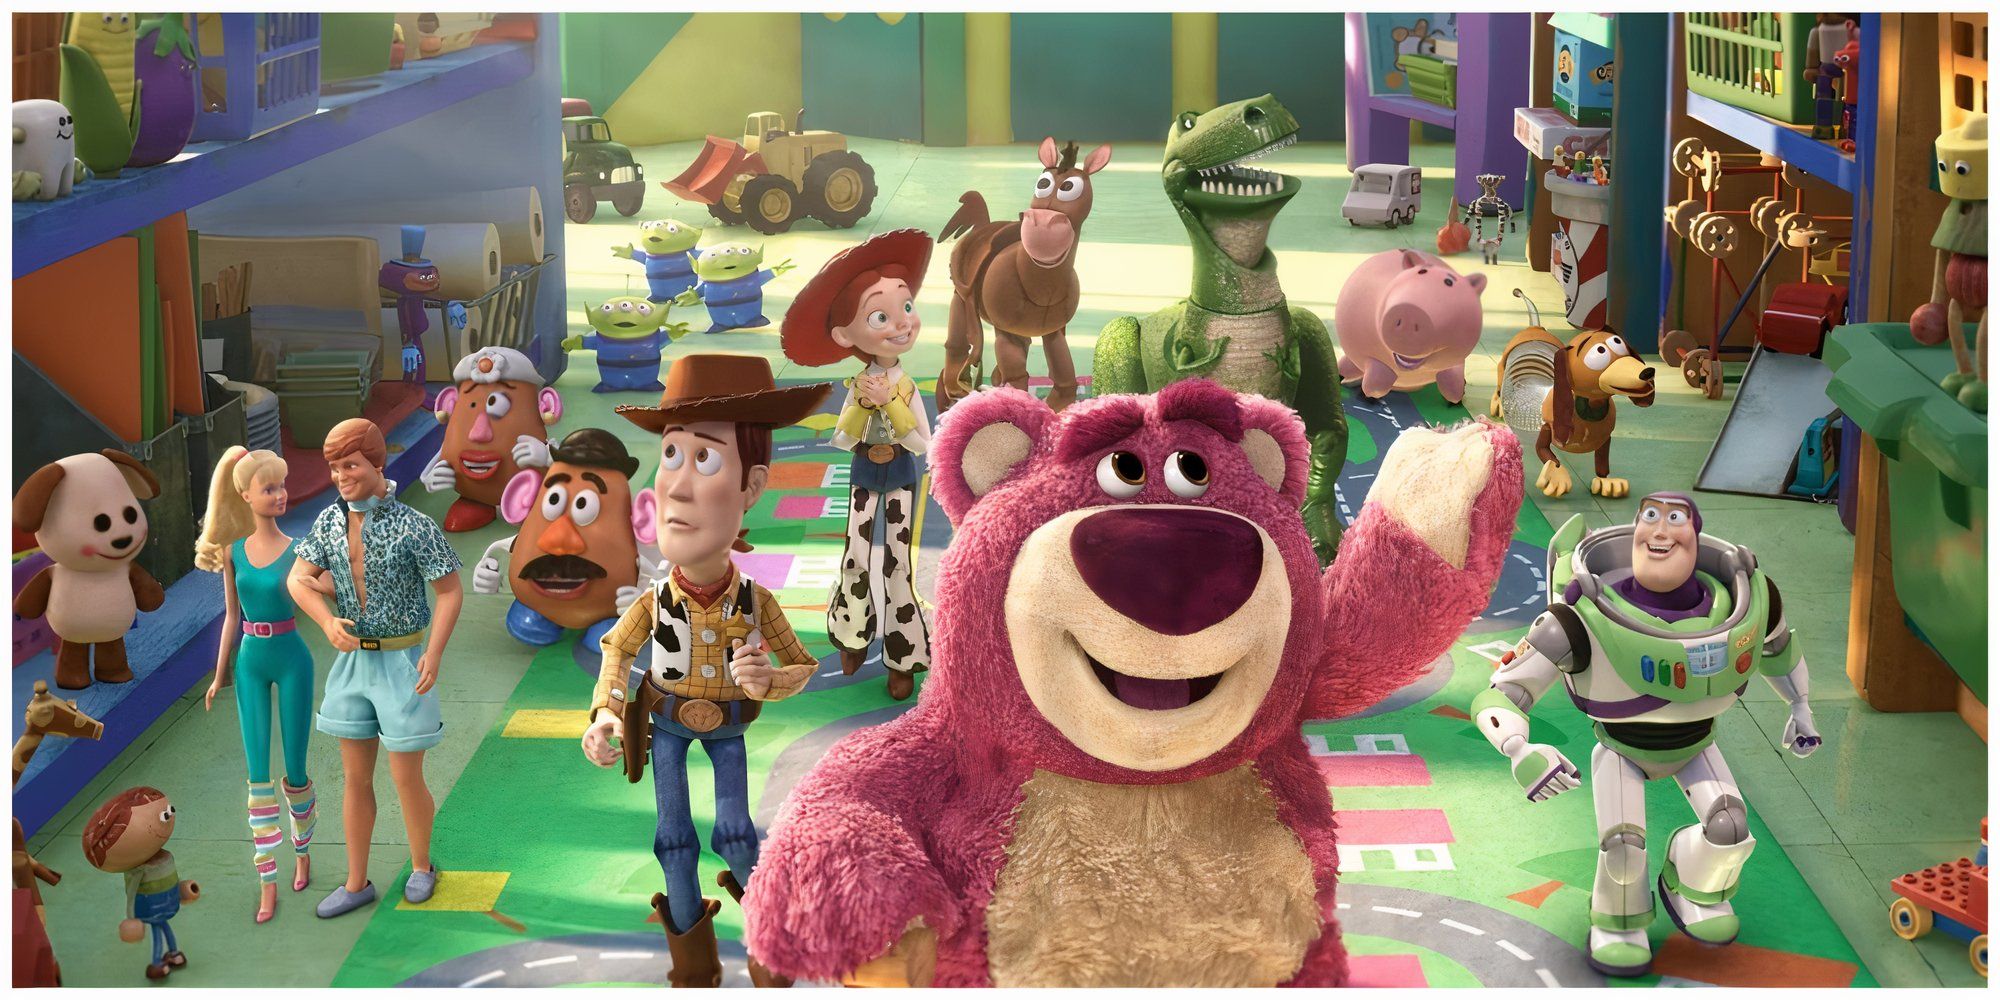 Lotso welcoming Woody, Buzz and friends at Sunnyside Daycare